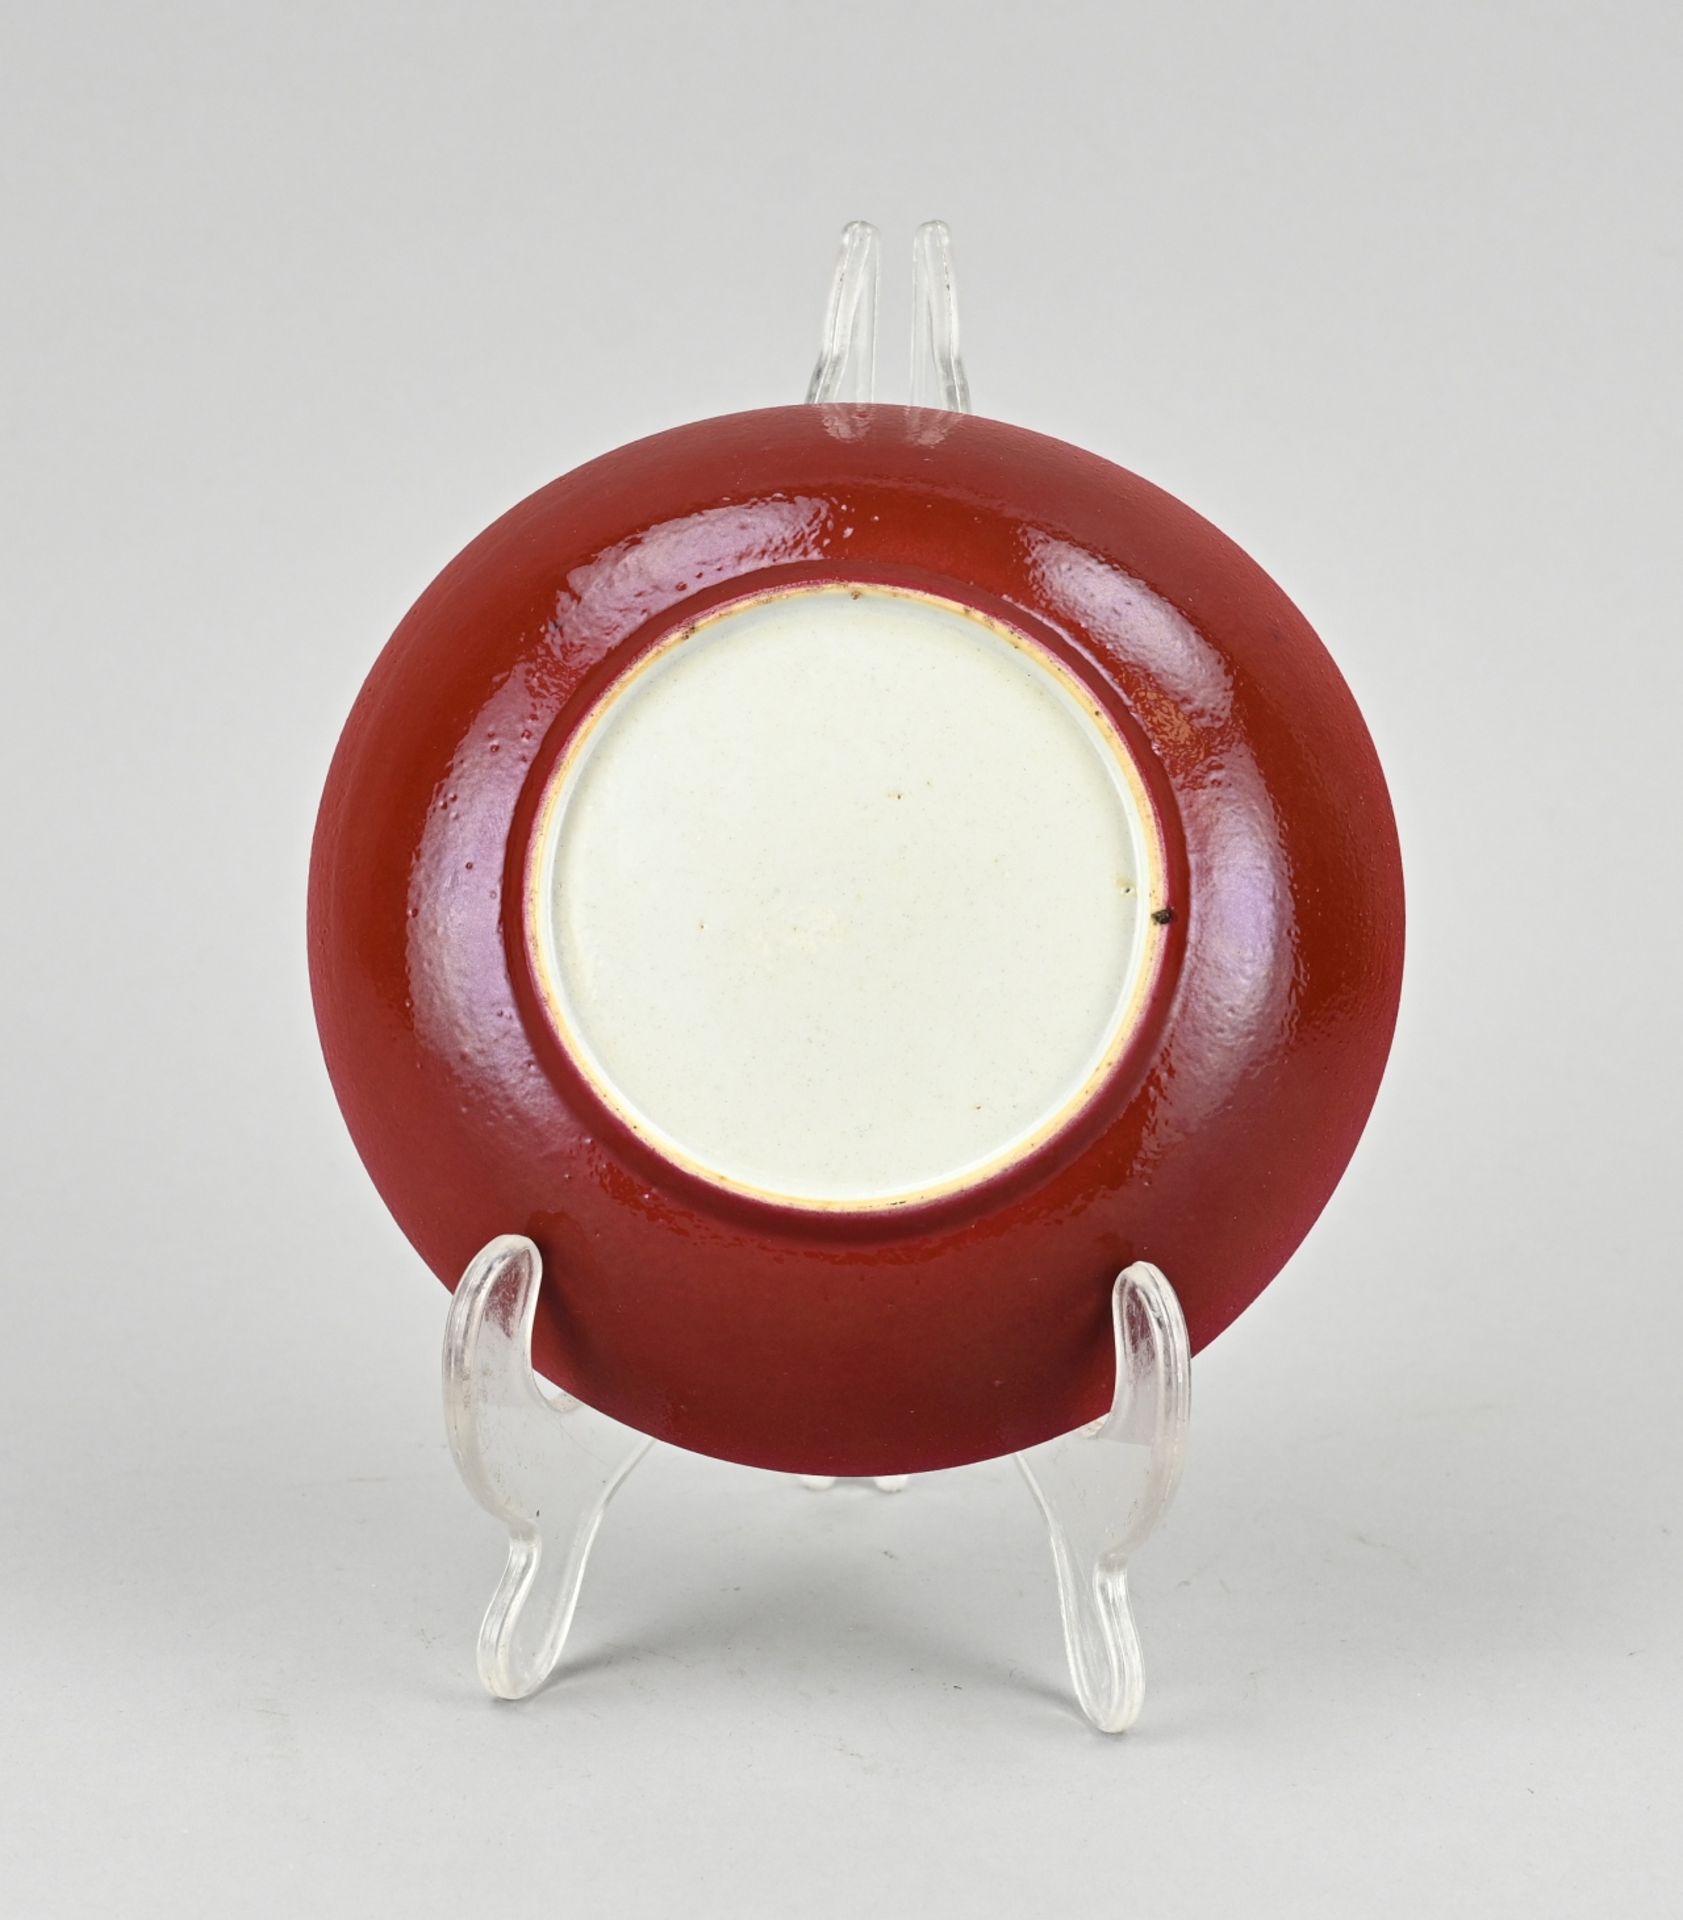 Chinese plate (ruby back) Ã˜ 14.3 cm. - Image 2 of 2